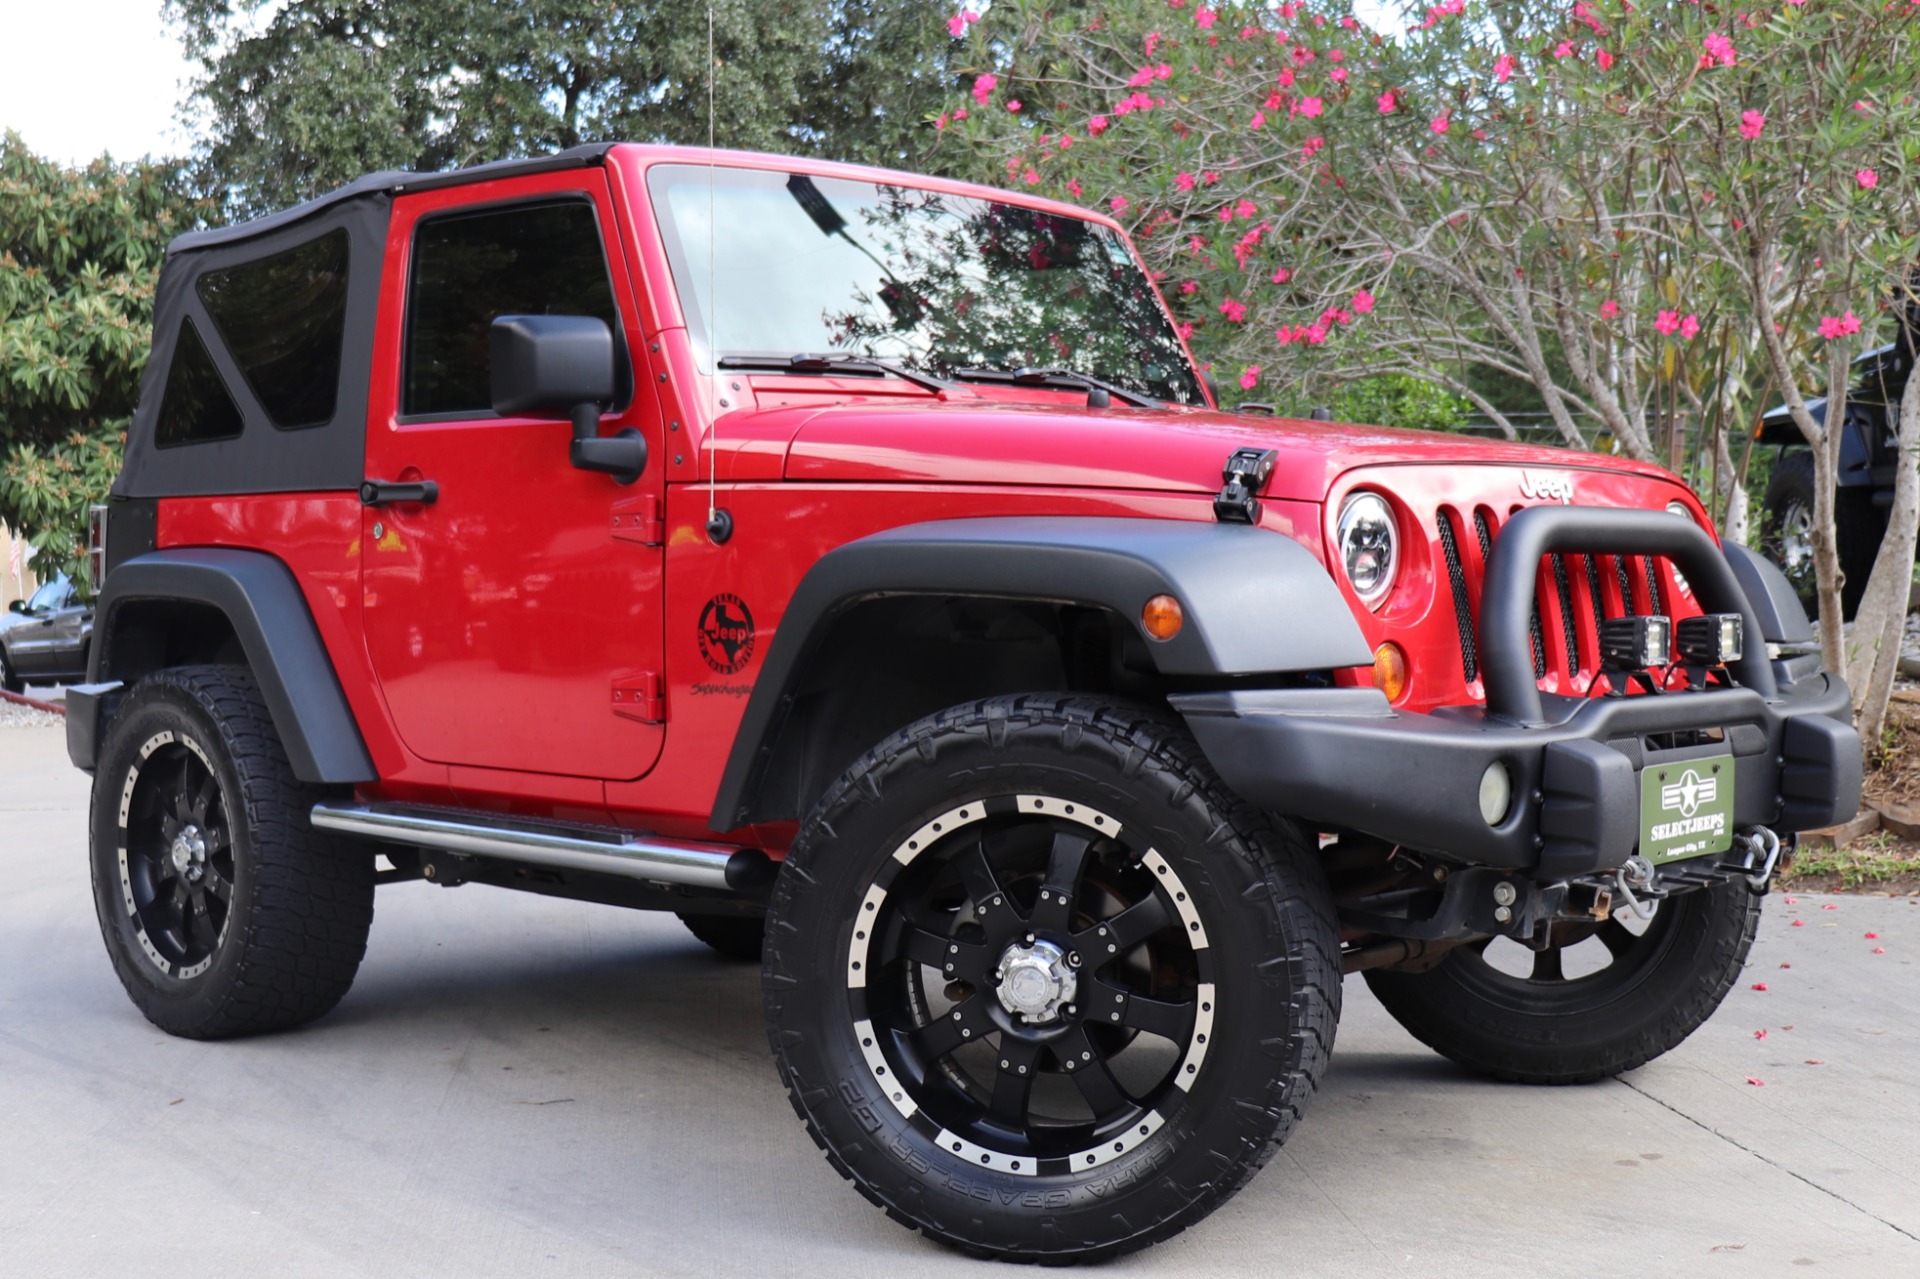 Used 2008 Jeep Wrangler X For Sale ($18,995) | Select Jeeps Inc. Stock ...